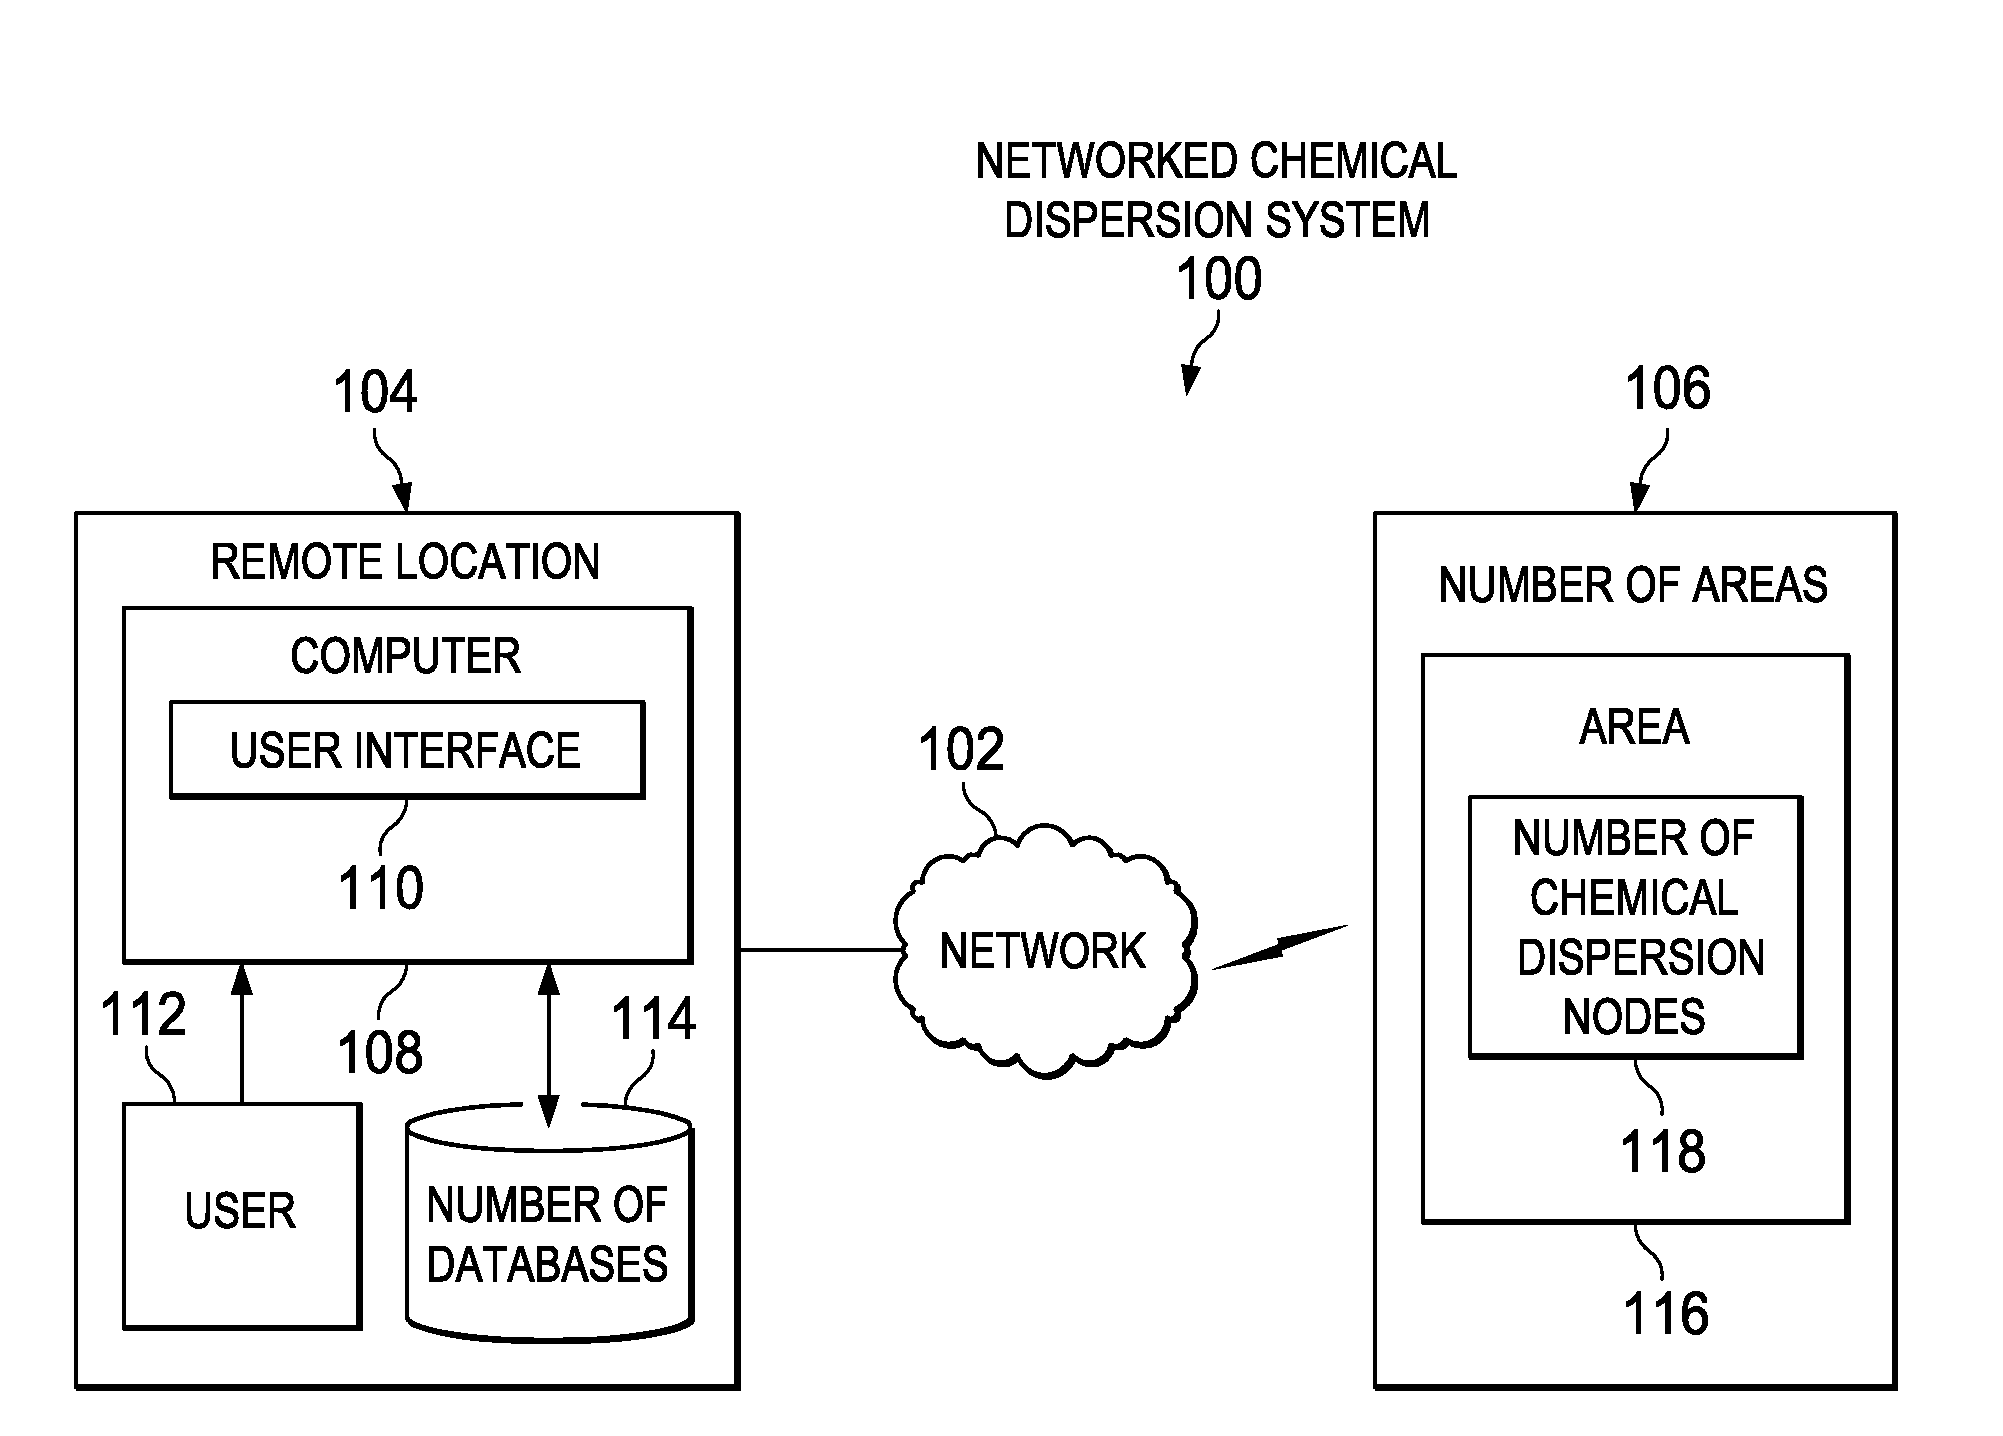 Networked chemical dispersion system